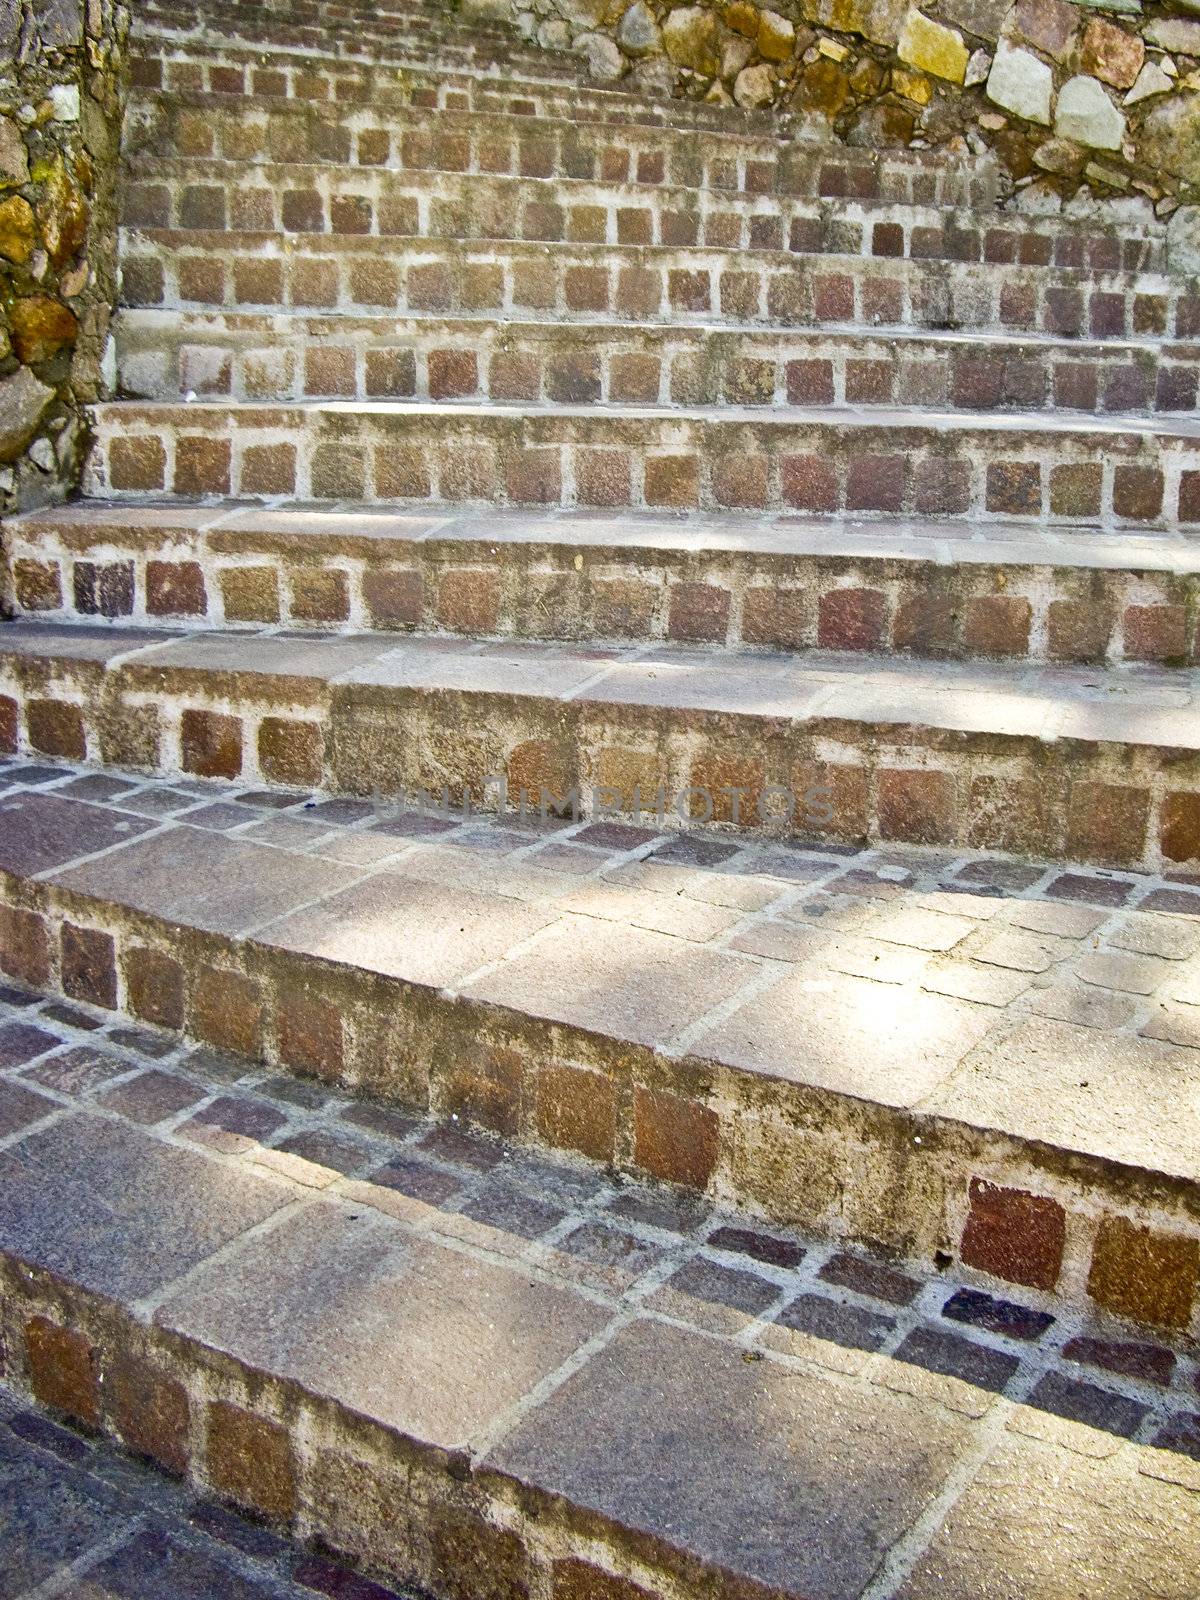 Stairway of color stone in Guanajuato Mexico